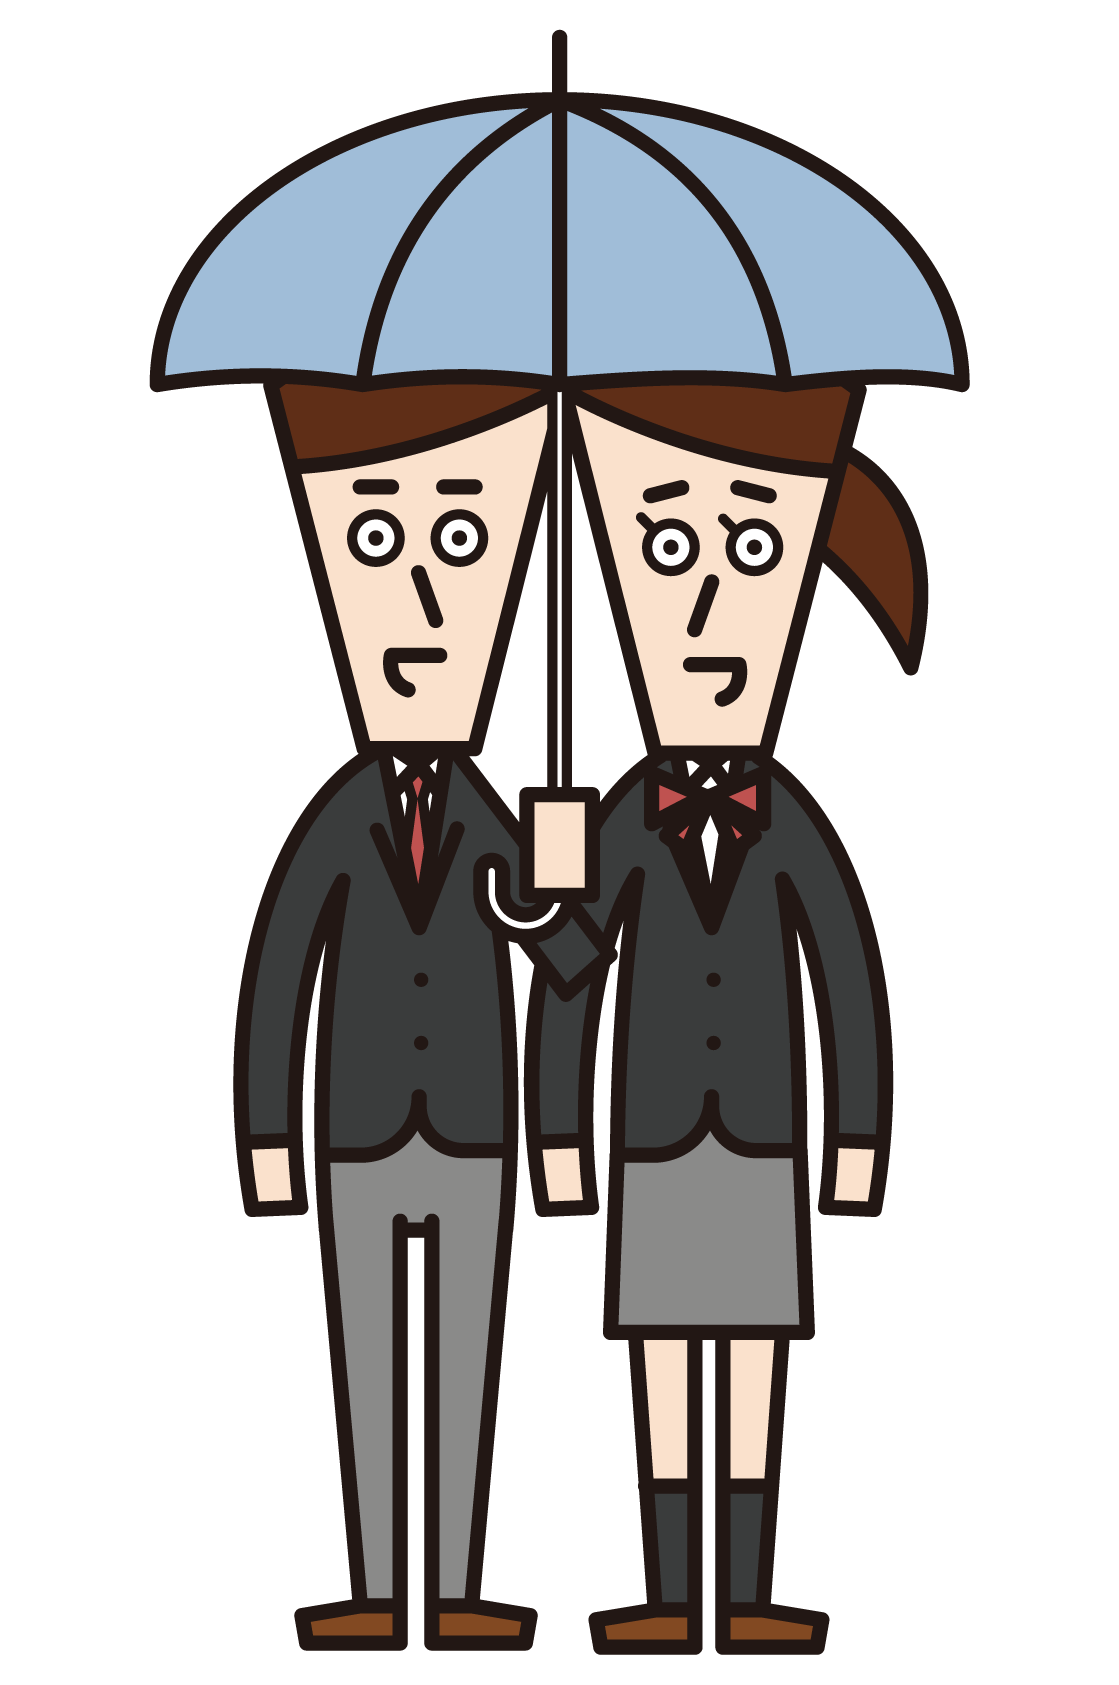 Illustration of a couple holding an umbrella